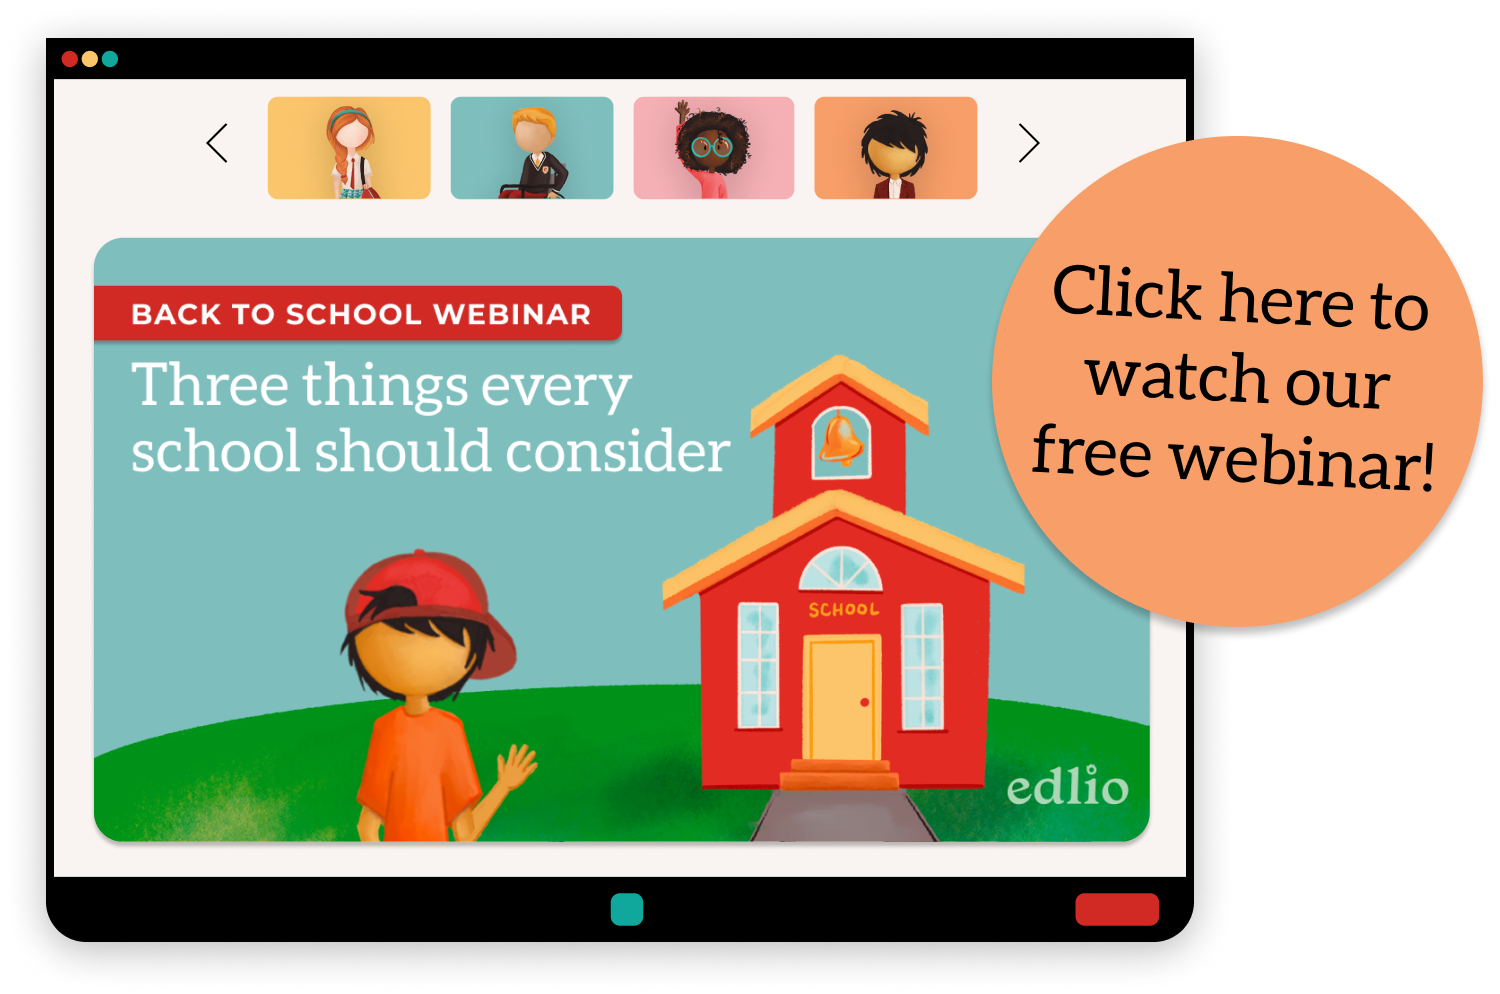 Click here to watch our free webinar - Three things every school should consider